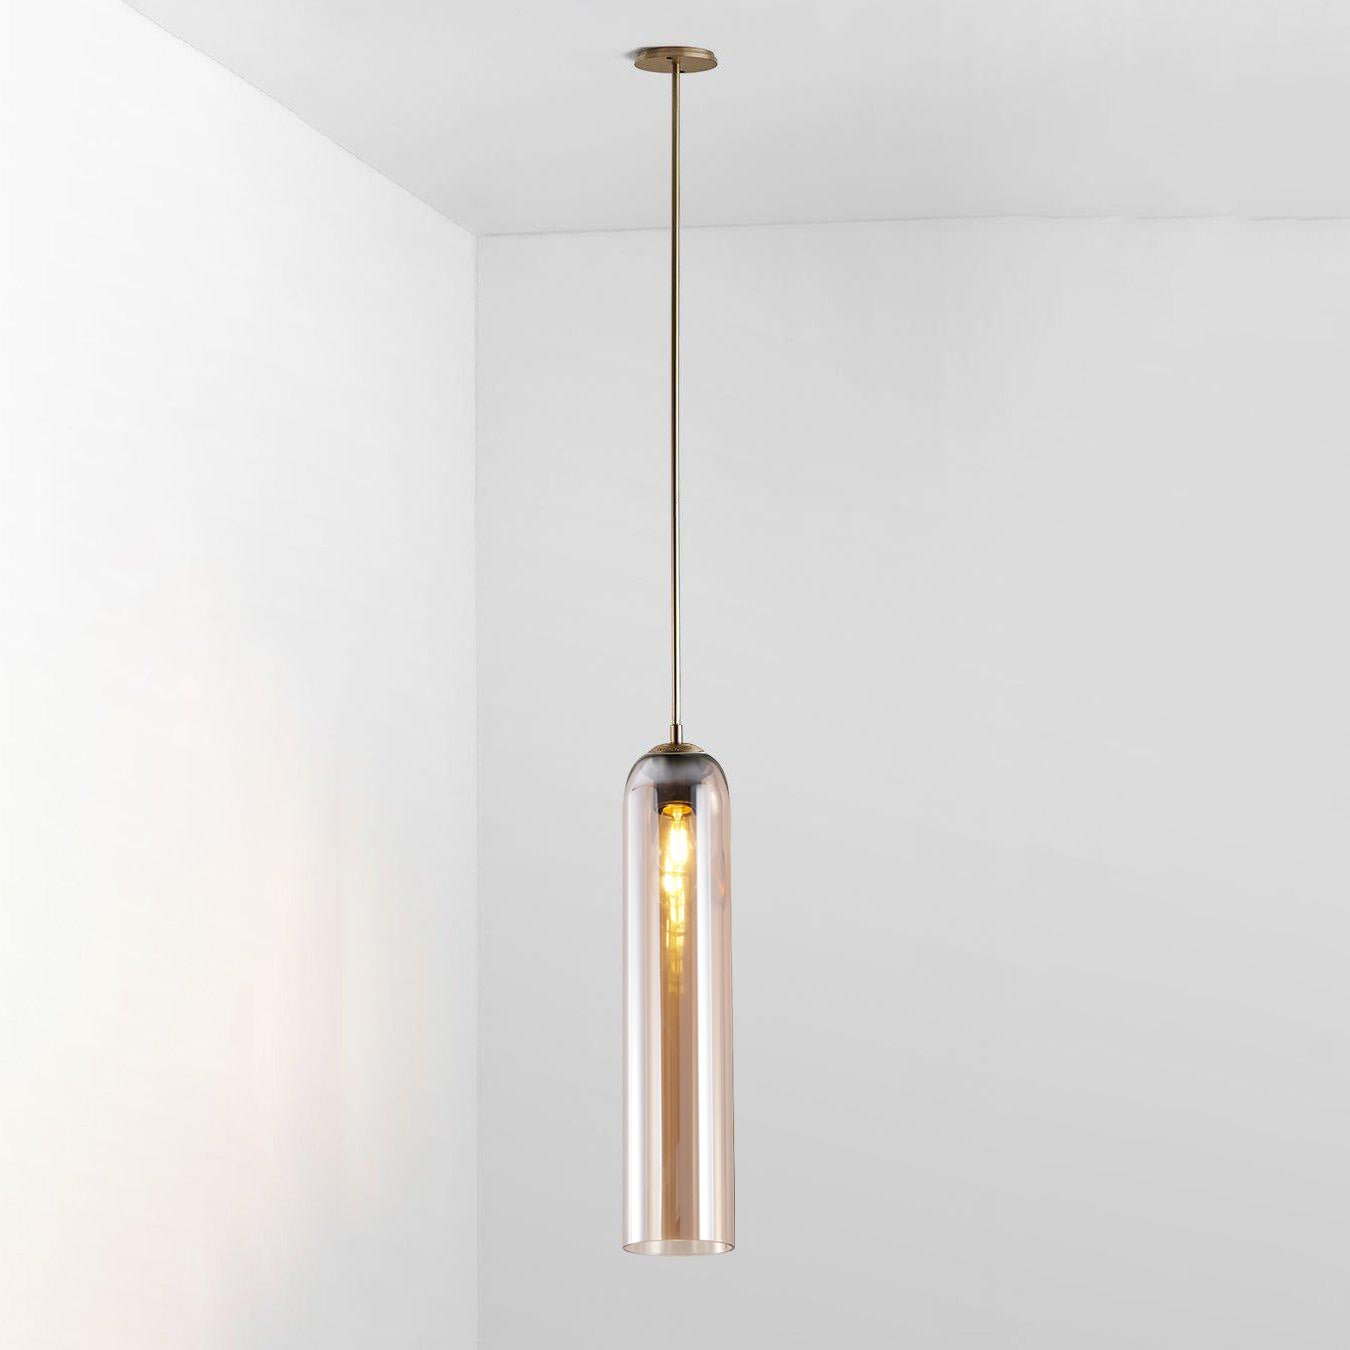 Amber Gold Long Tube Glass Pendant Light (Measuring 3.9" in Diameter and 47.2" in Height, or 10cm in Diameter and 120cm in Height)